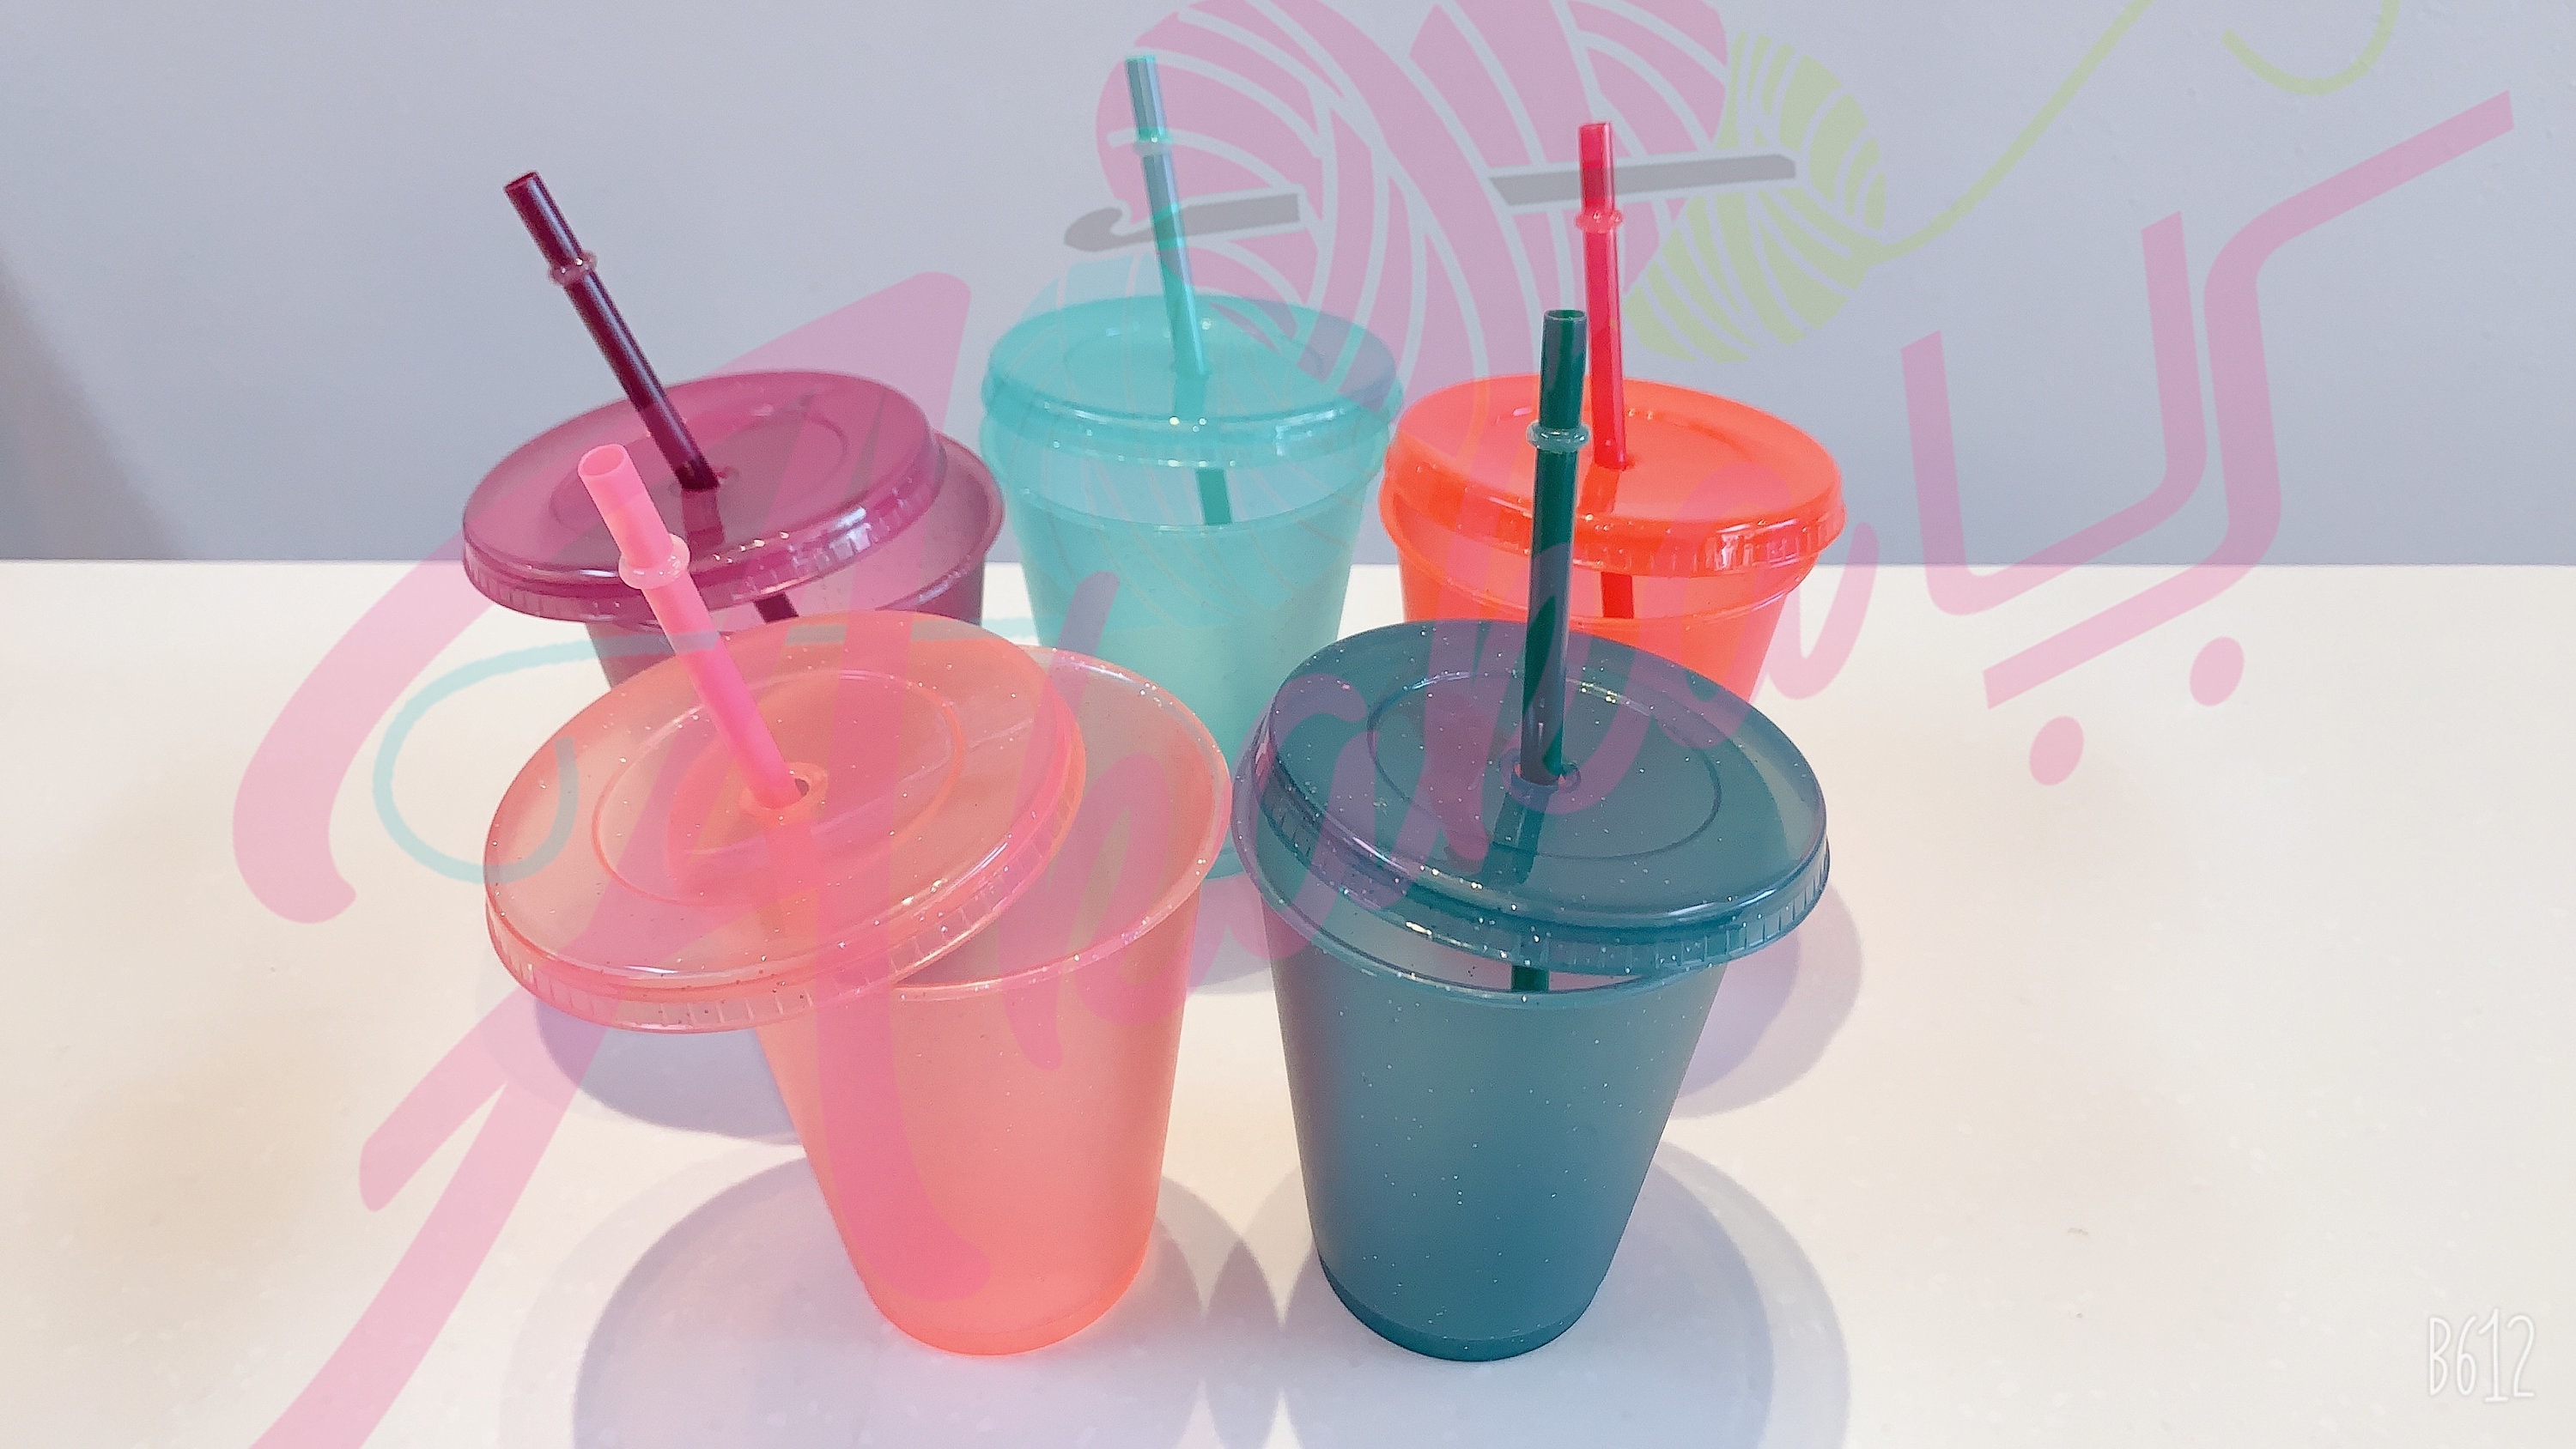 Glitter Plastic Cups with Straws and Lid,5 Packs 24 oz. Colorful Glitter  Reusable Cups ,Elegant Plastic Party Cups Wedding Decorations,Summer Coffee